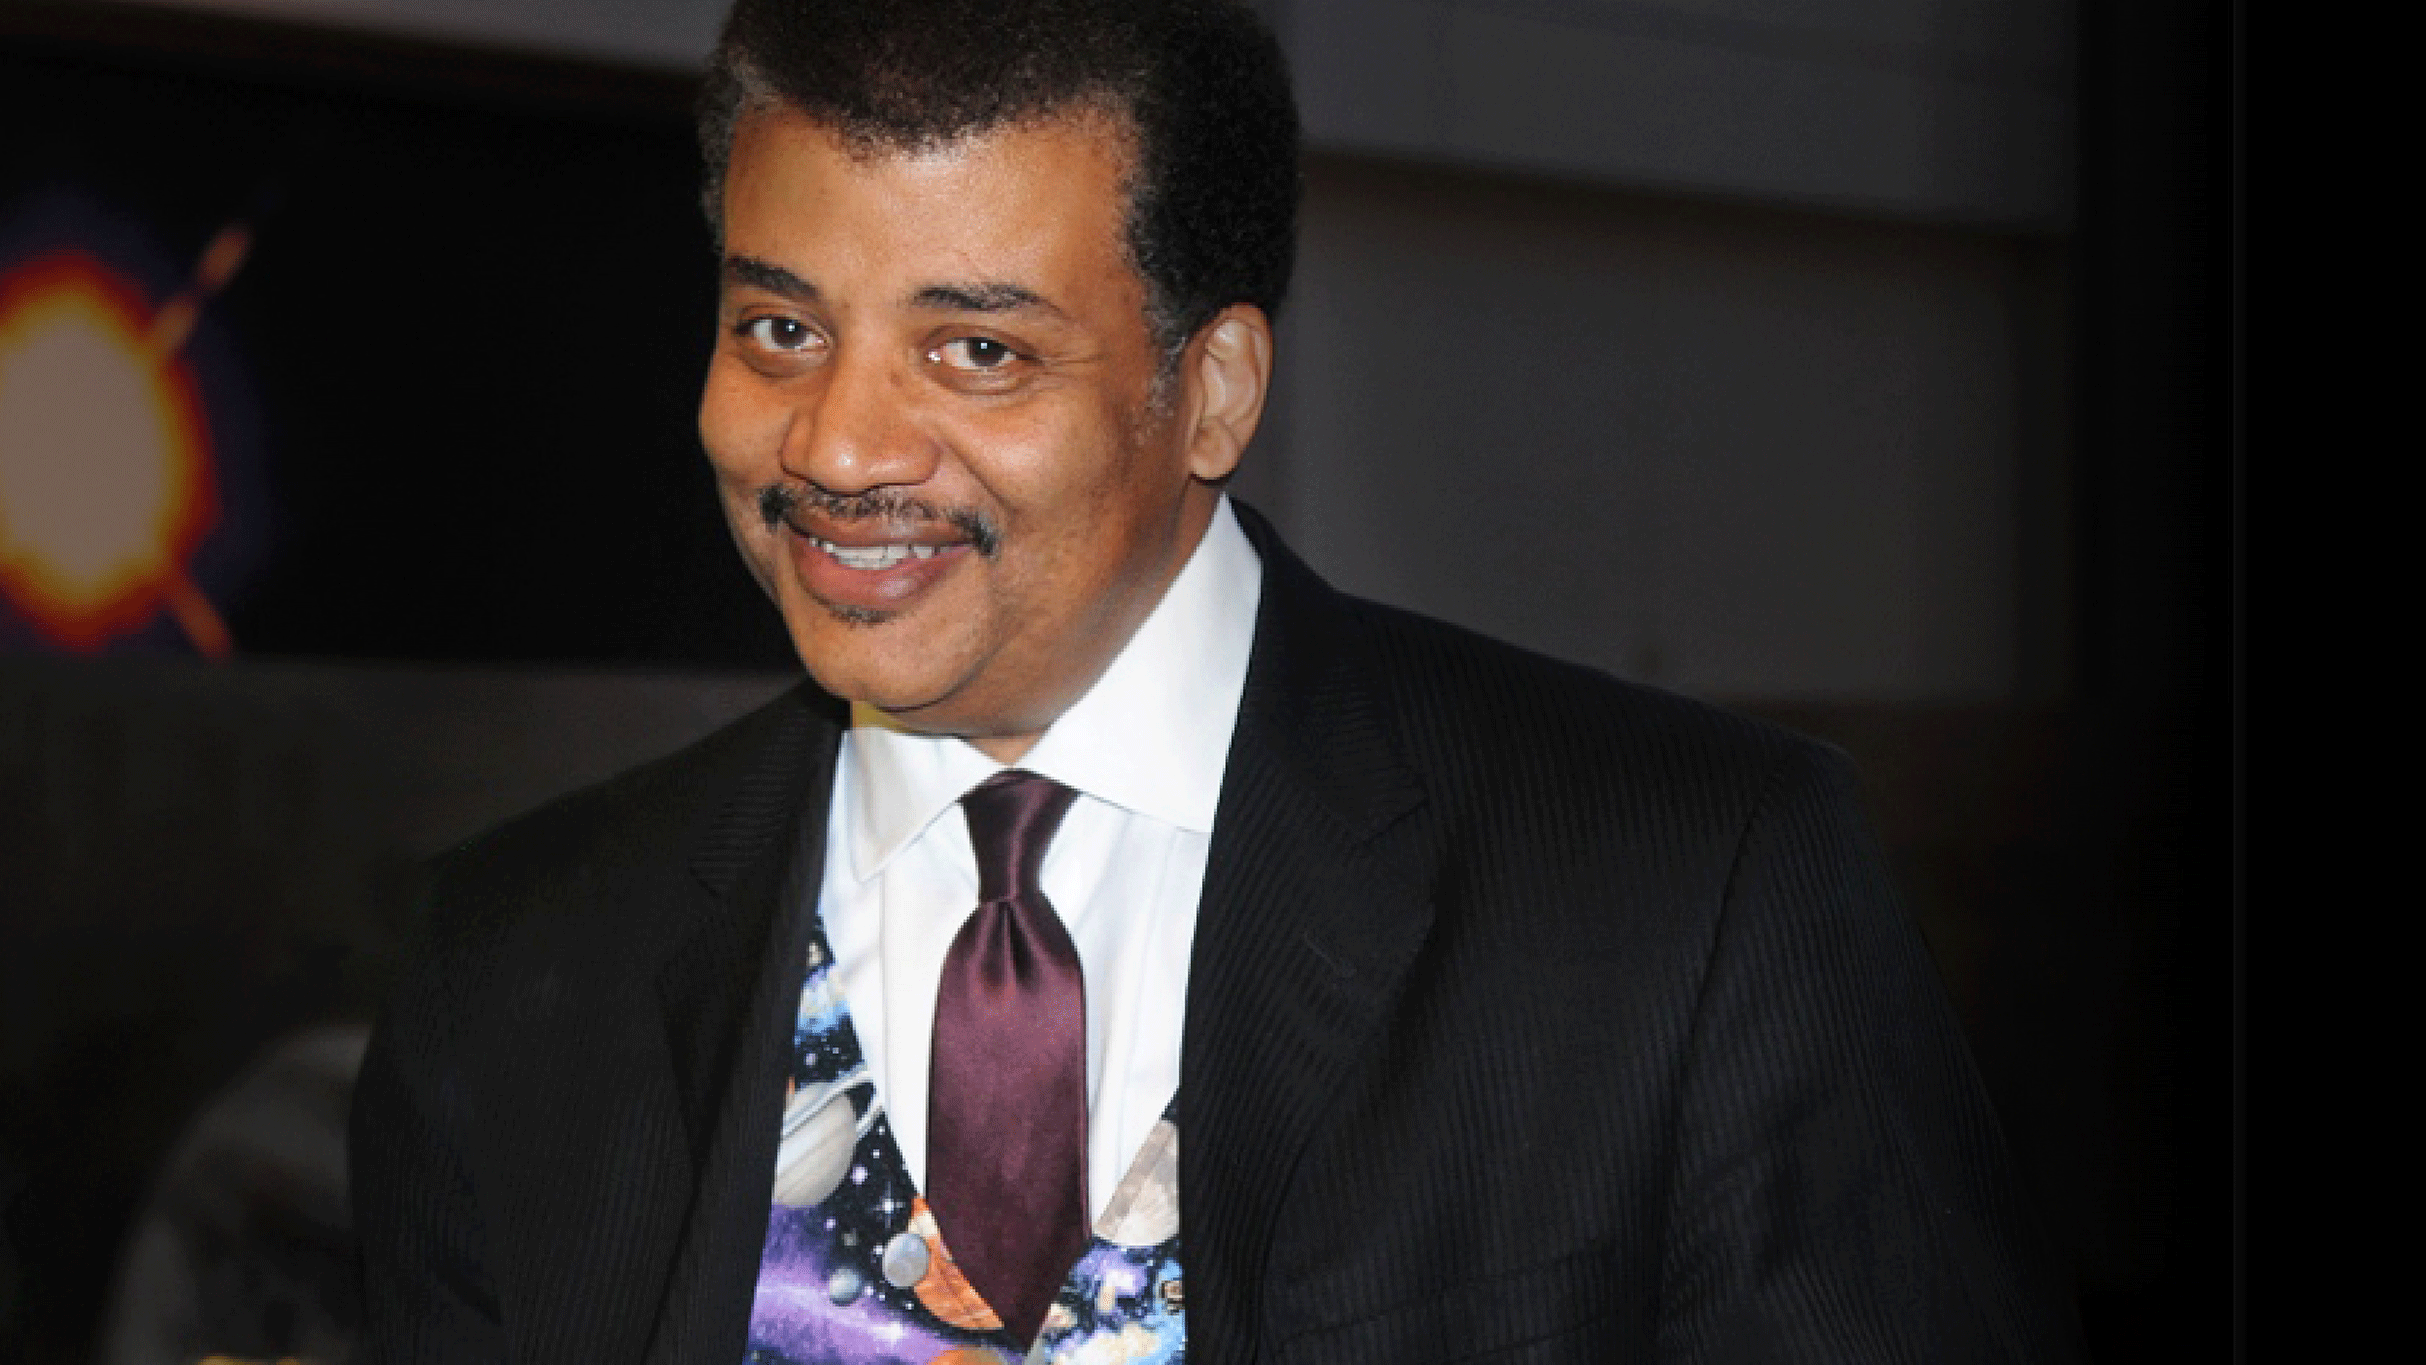 Dr. Neil DeGrasse Tyson: Search For Life in the Universe